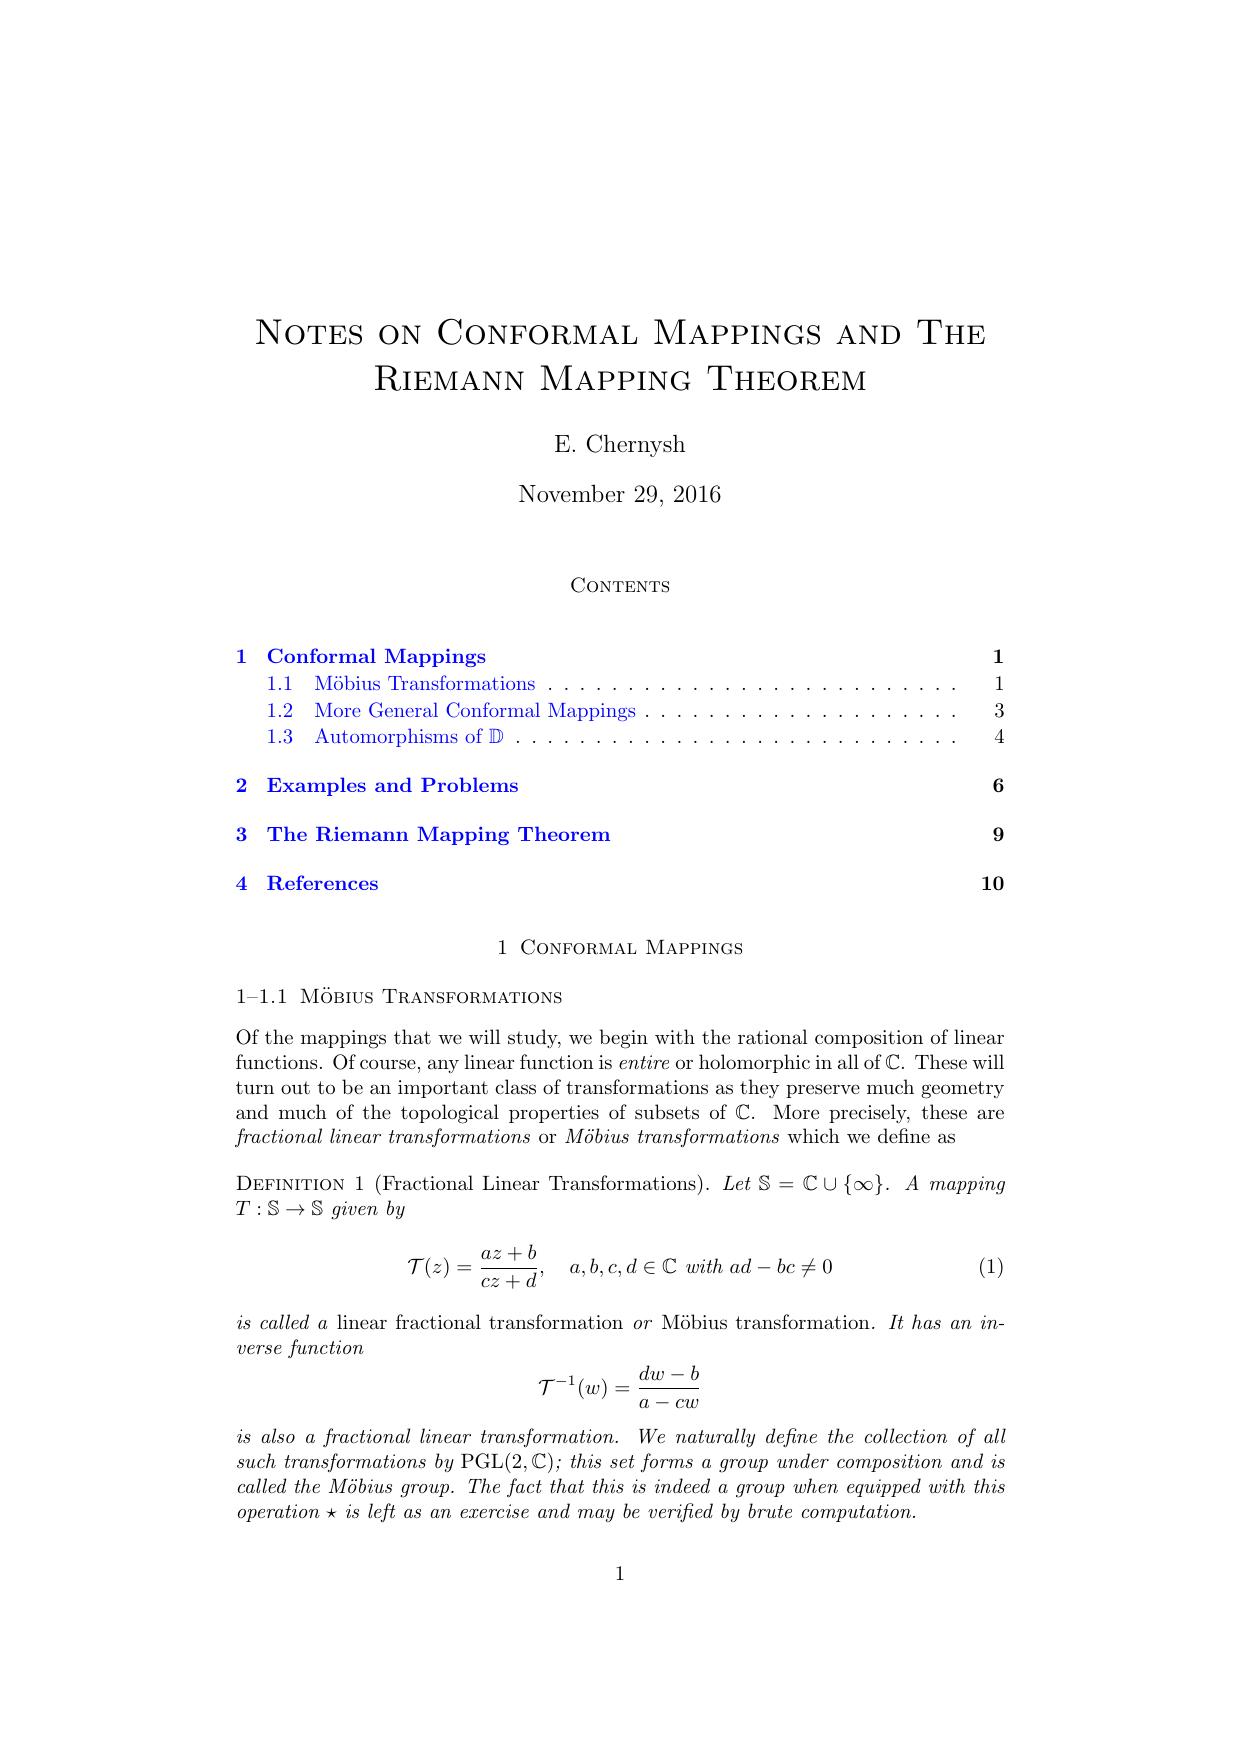 Notes on Conformal Mappings and the Riemann Mapping Theorem